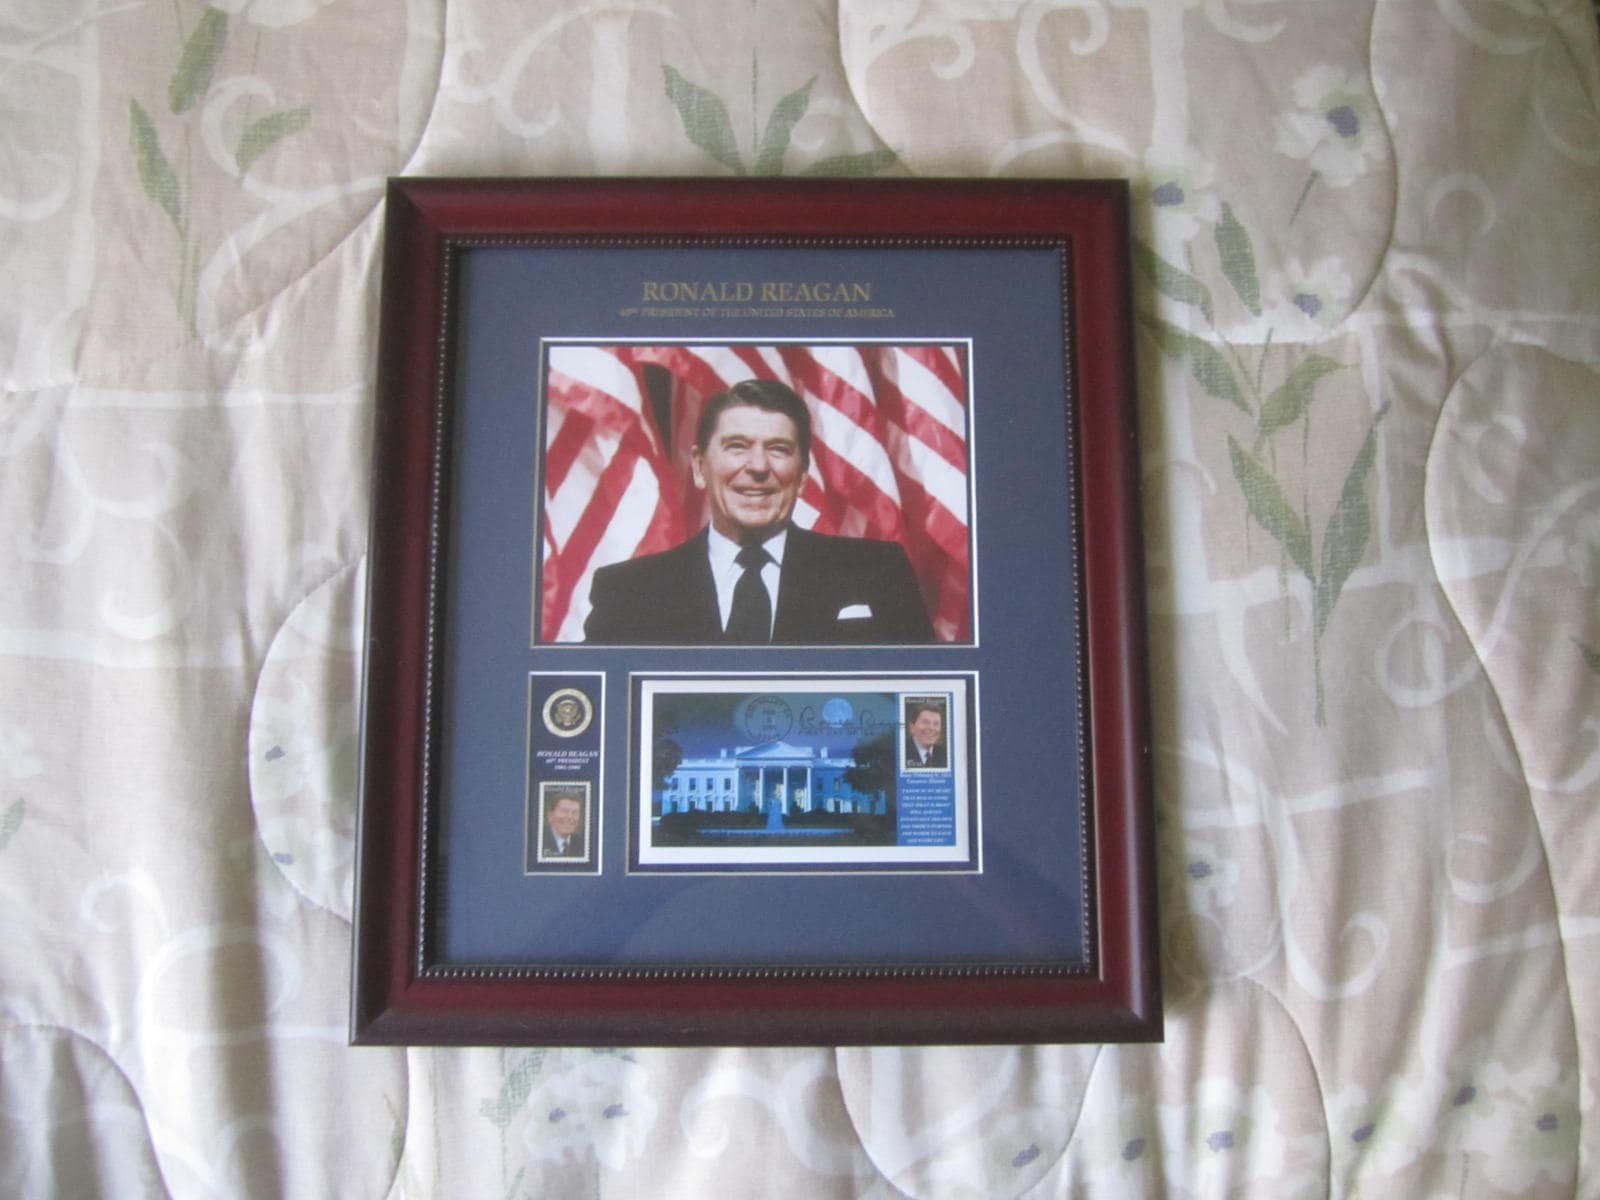 Framed Ronald Reagan Picture with First Day Cover and Stamp - February 9, 2005